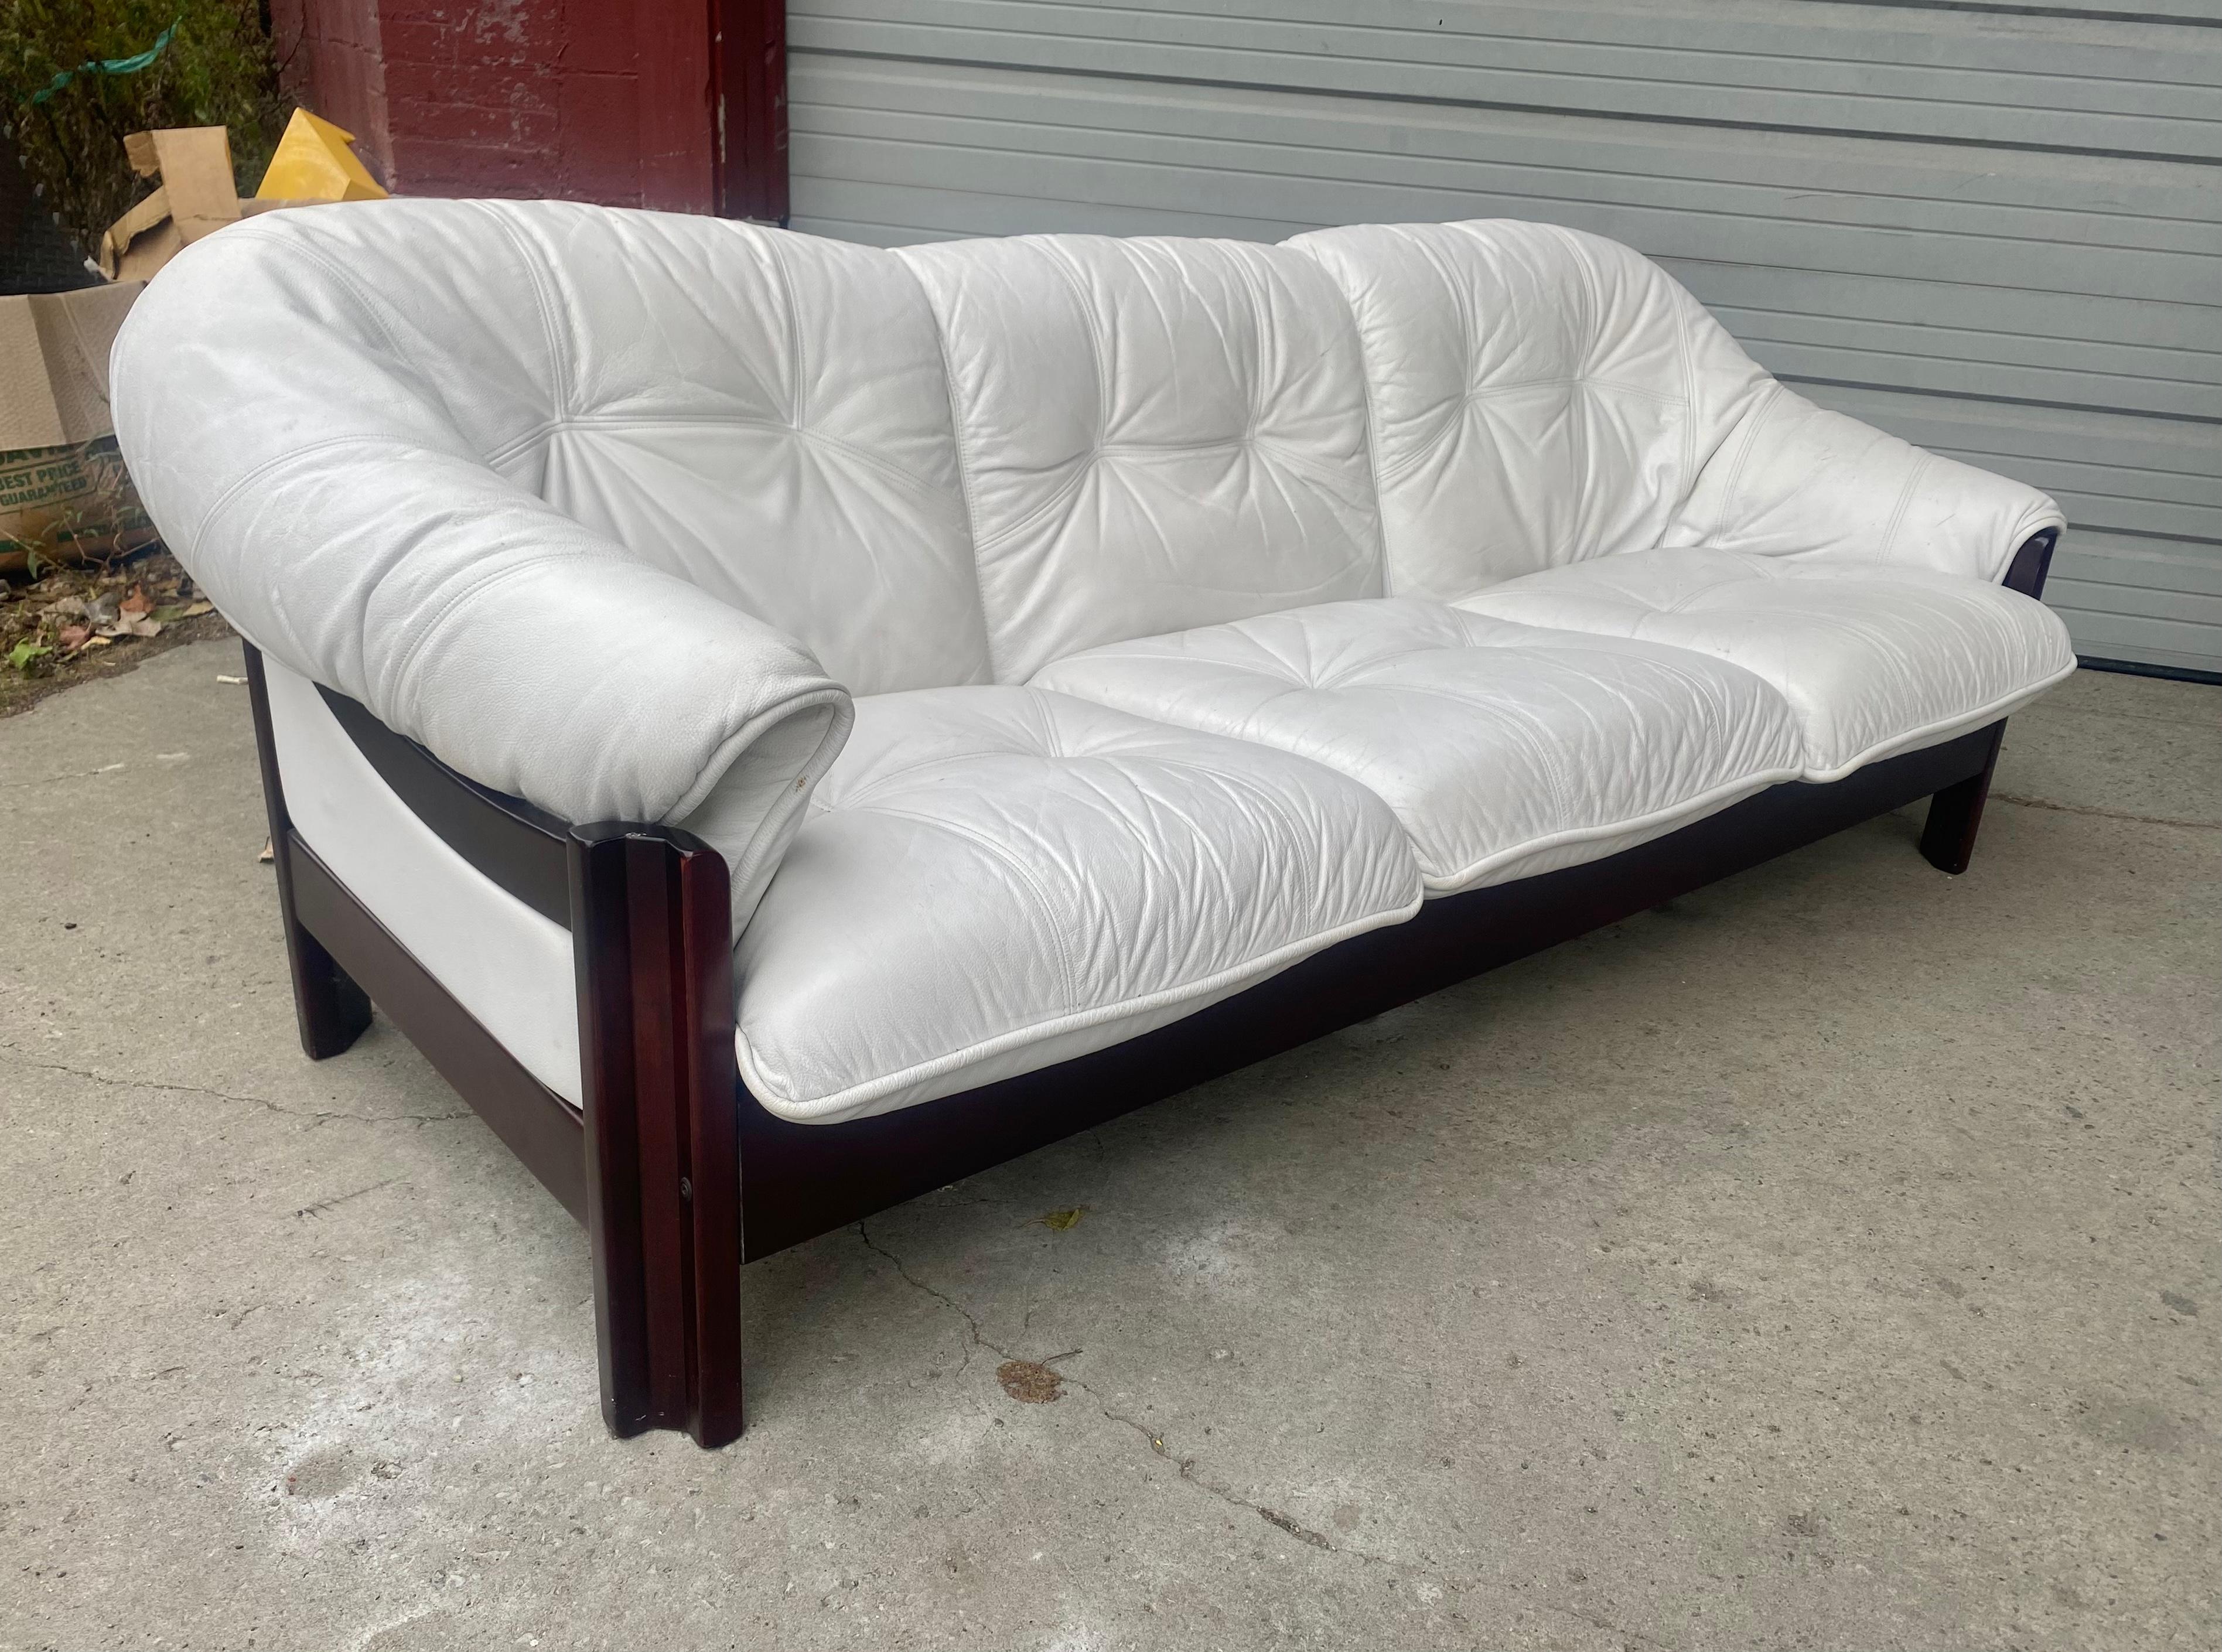 BraziLIAN  Rosewood and  White Leather Sofa by Jean Gillon for Probel S.A... Classic Modernist 1970's design.. Extremely comfortable.. Superior quality and construction.Retains its original ,super quality , white leather upholstery.. minor scratches